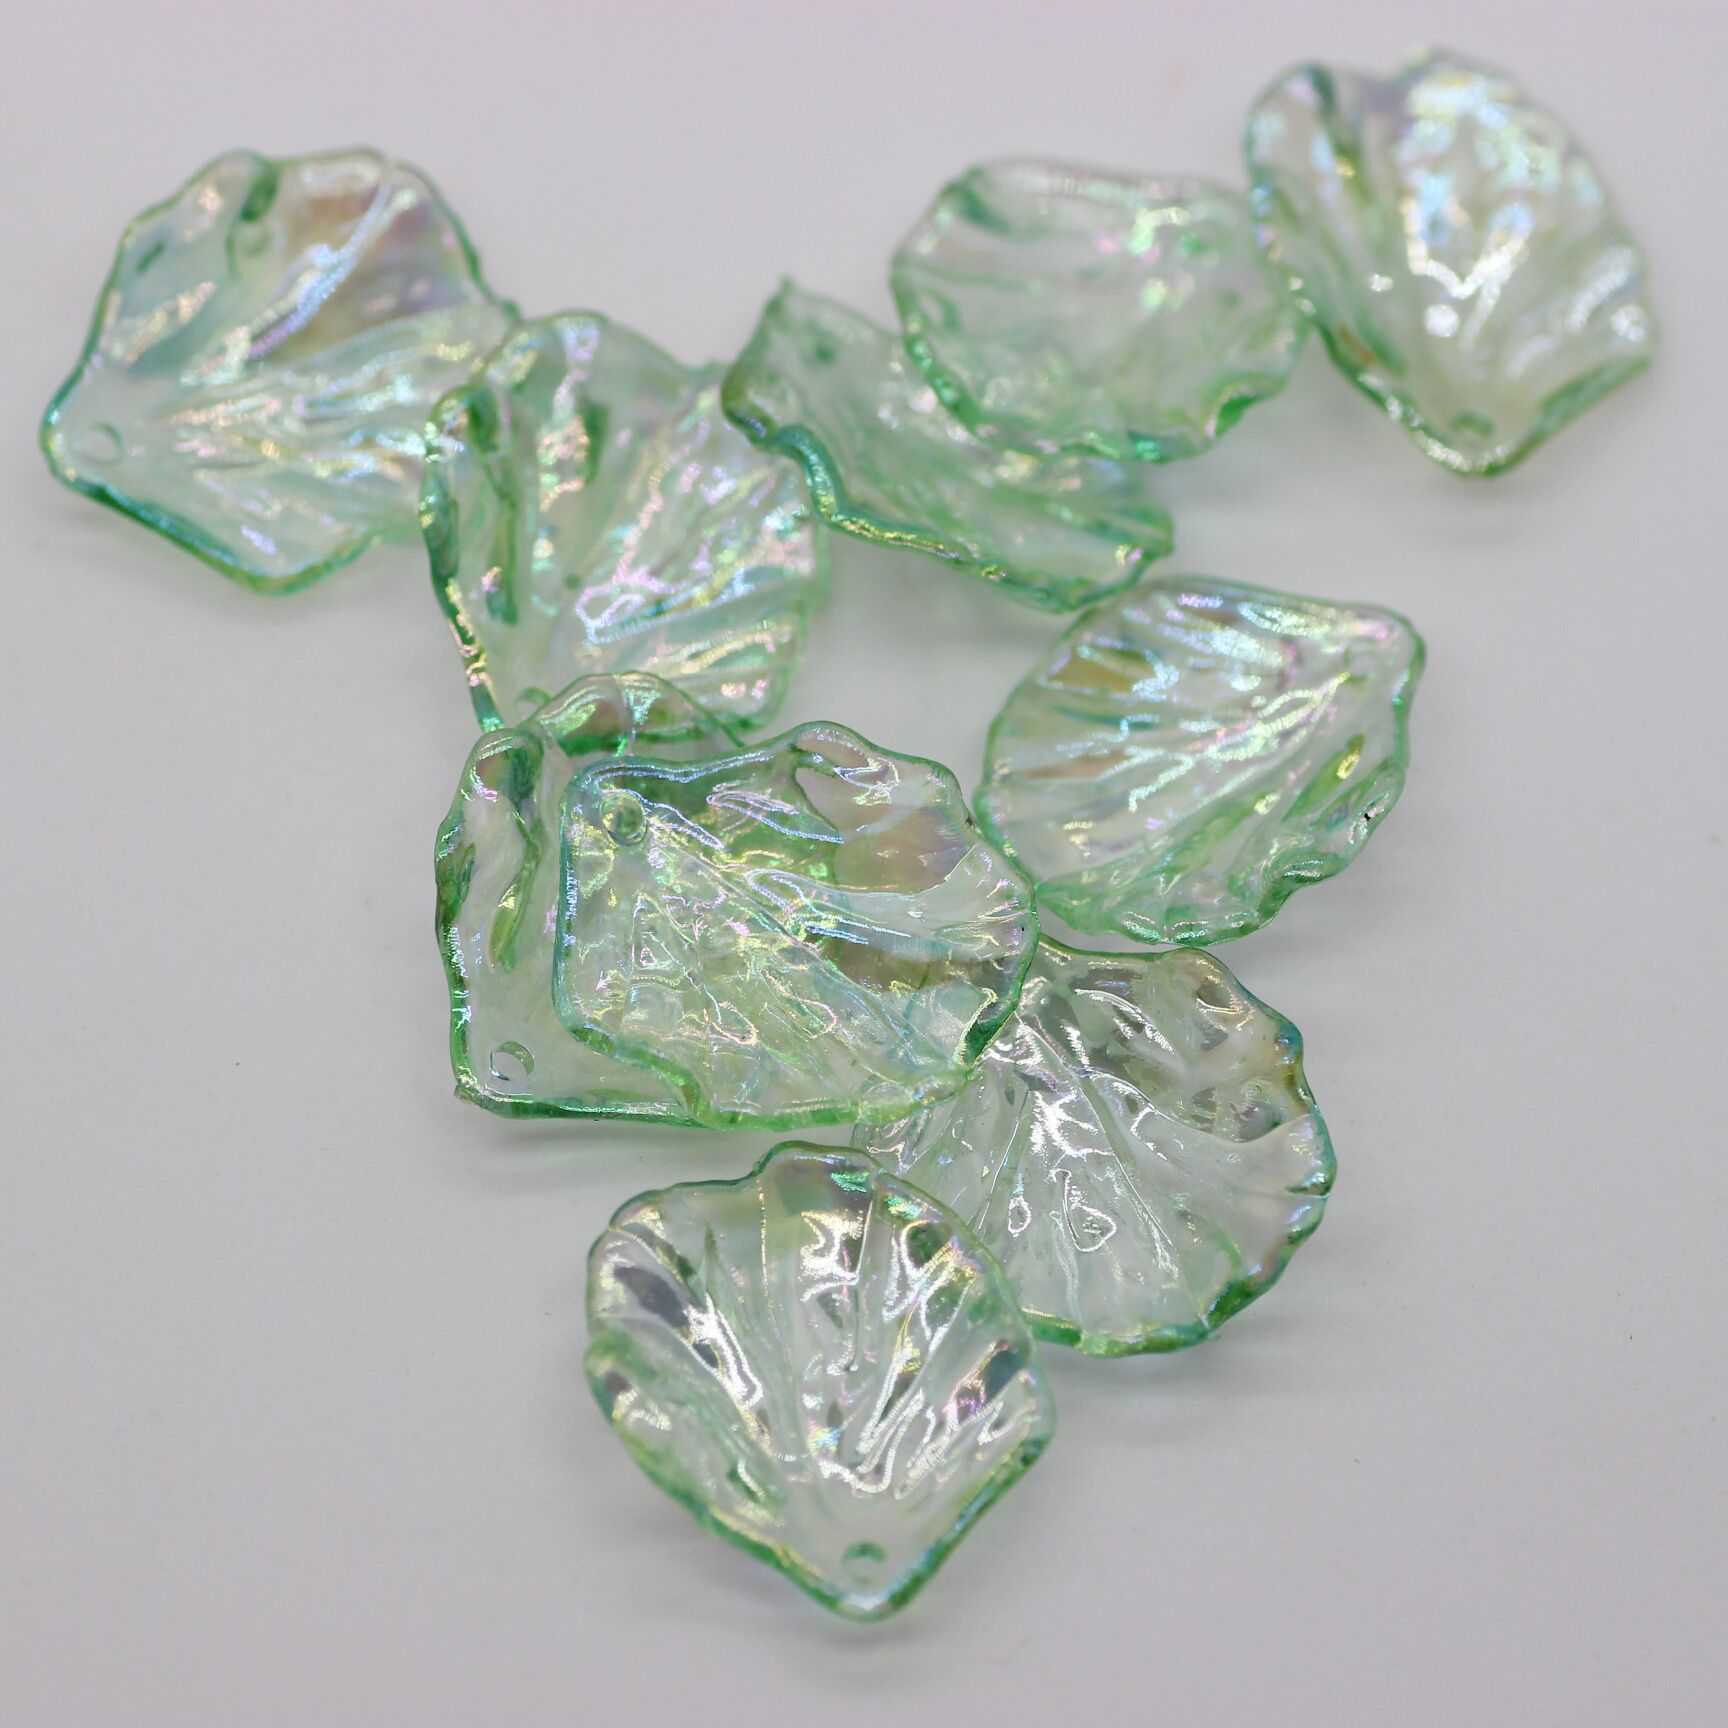 Large 18 * 20 mm clear green